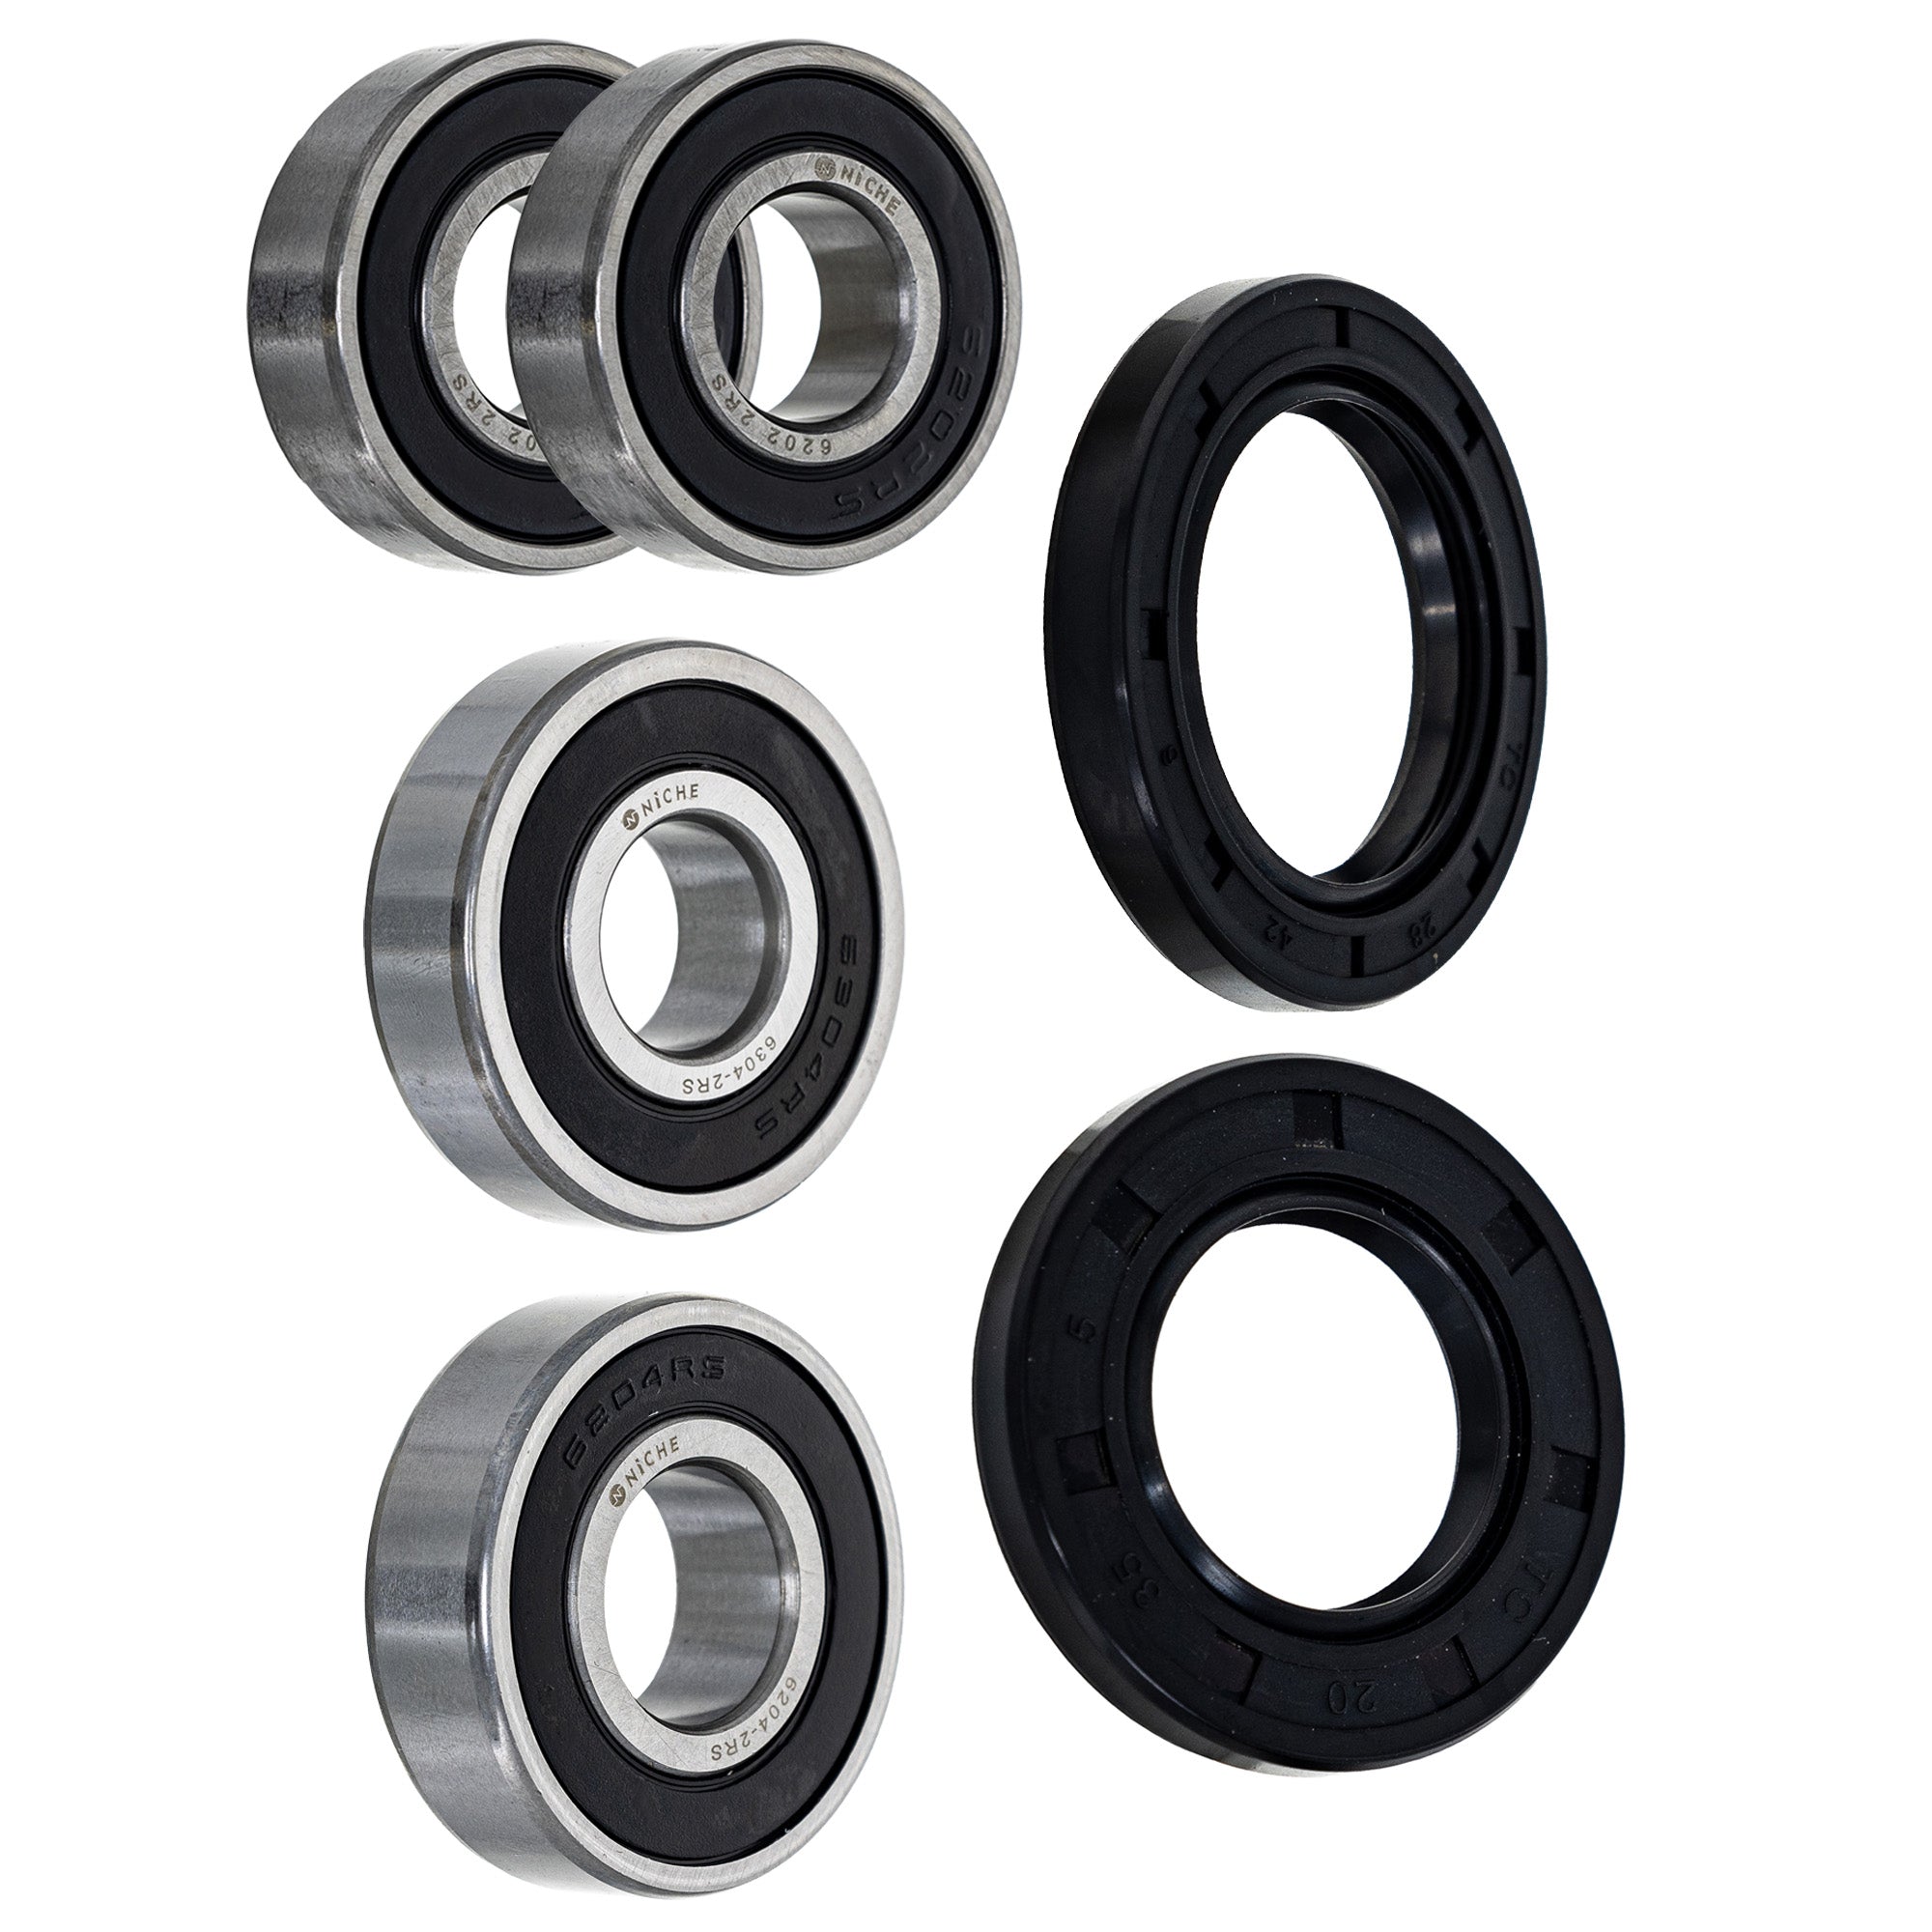 Wheel Bearing Seal Kit for zOTHER Ref No Elsinore NICHE MK1008809